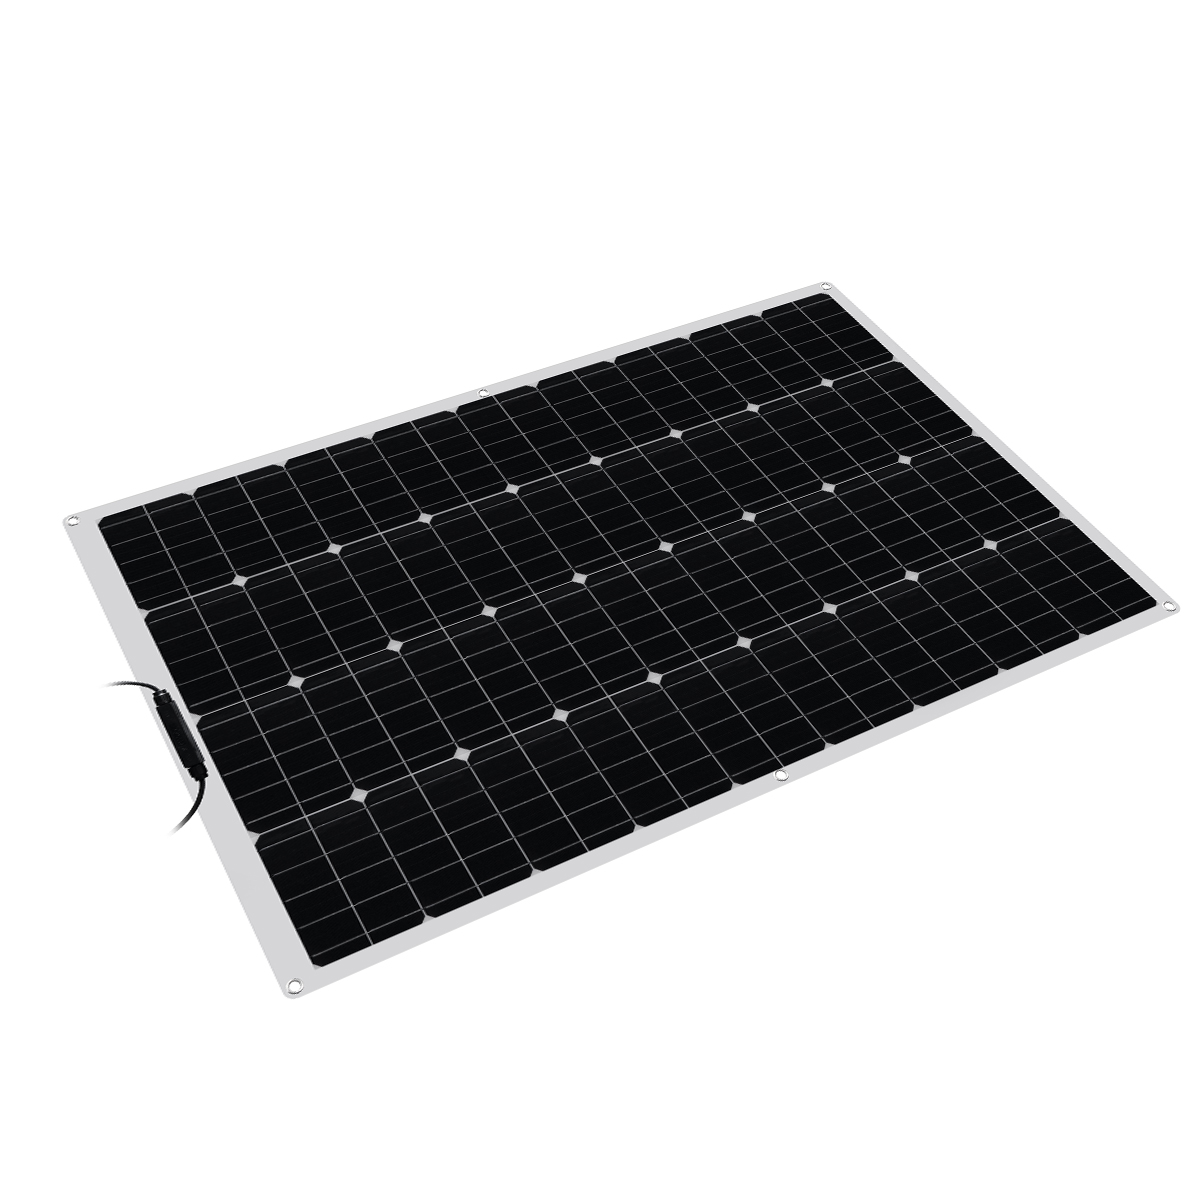 100W-18V-Flexible-Solar-Panel-Battery-Power-Charge-Kit-For-RV-Car-Boat-Camping-1717562-8